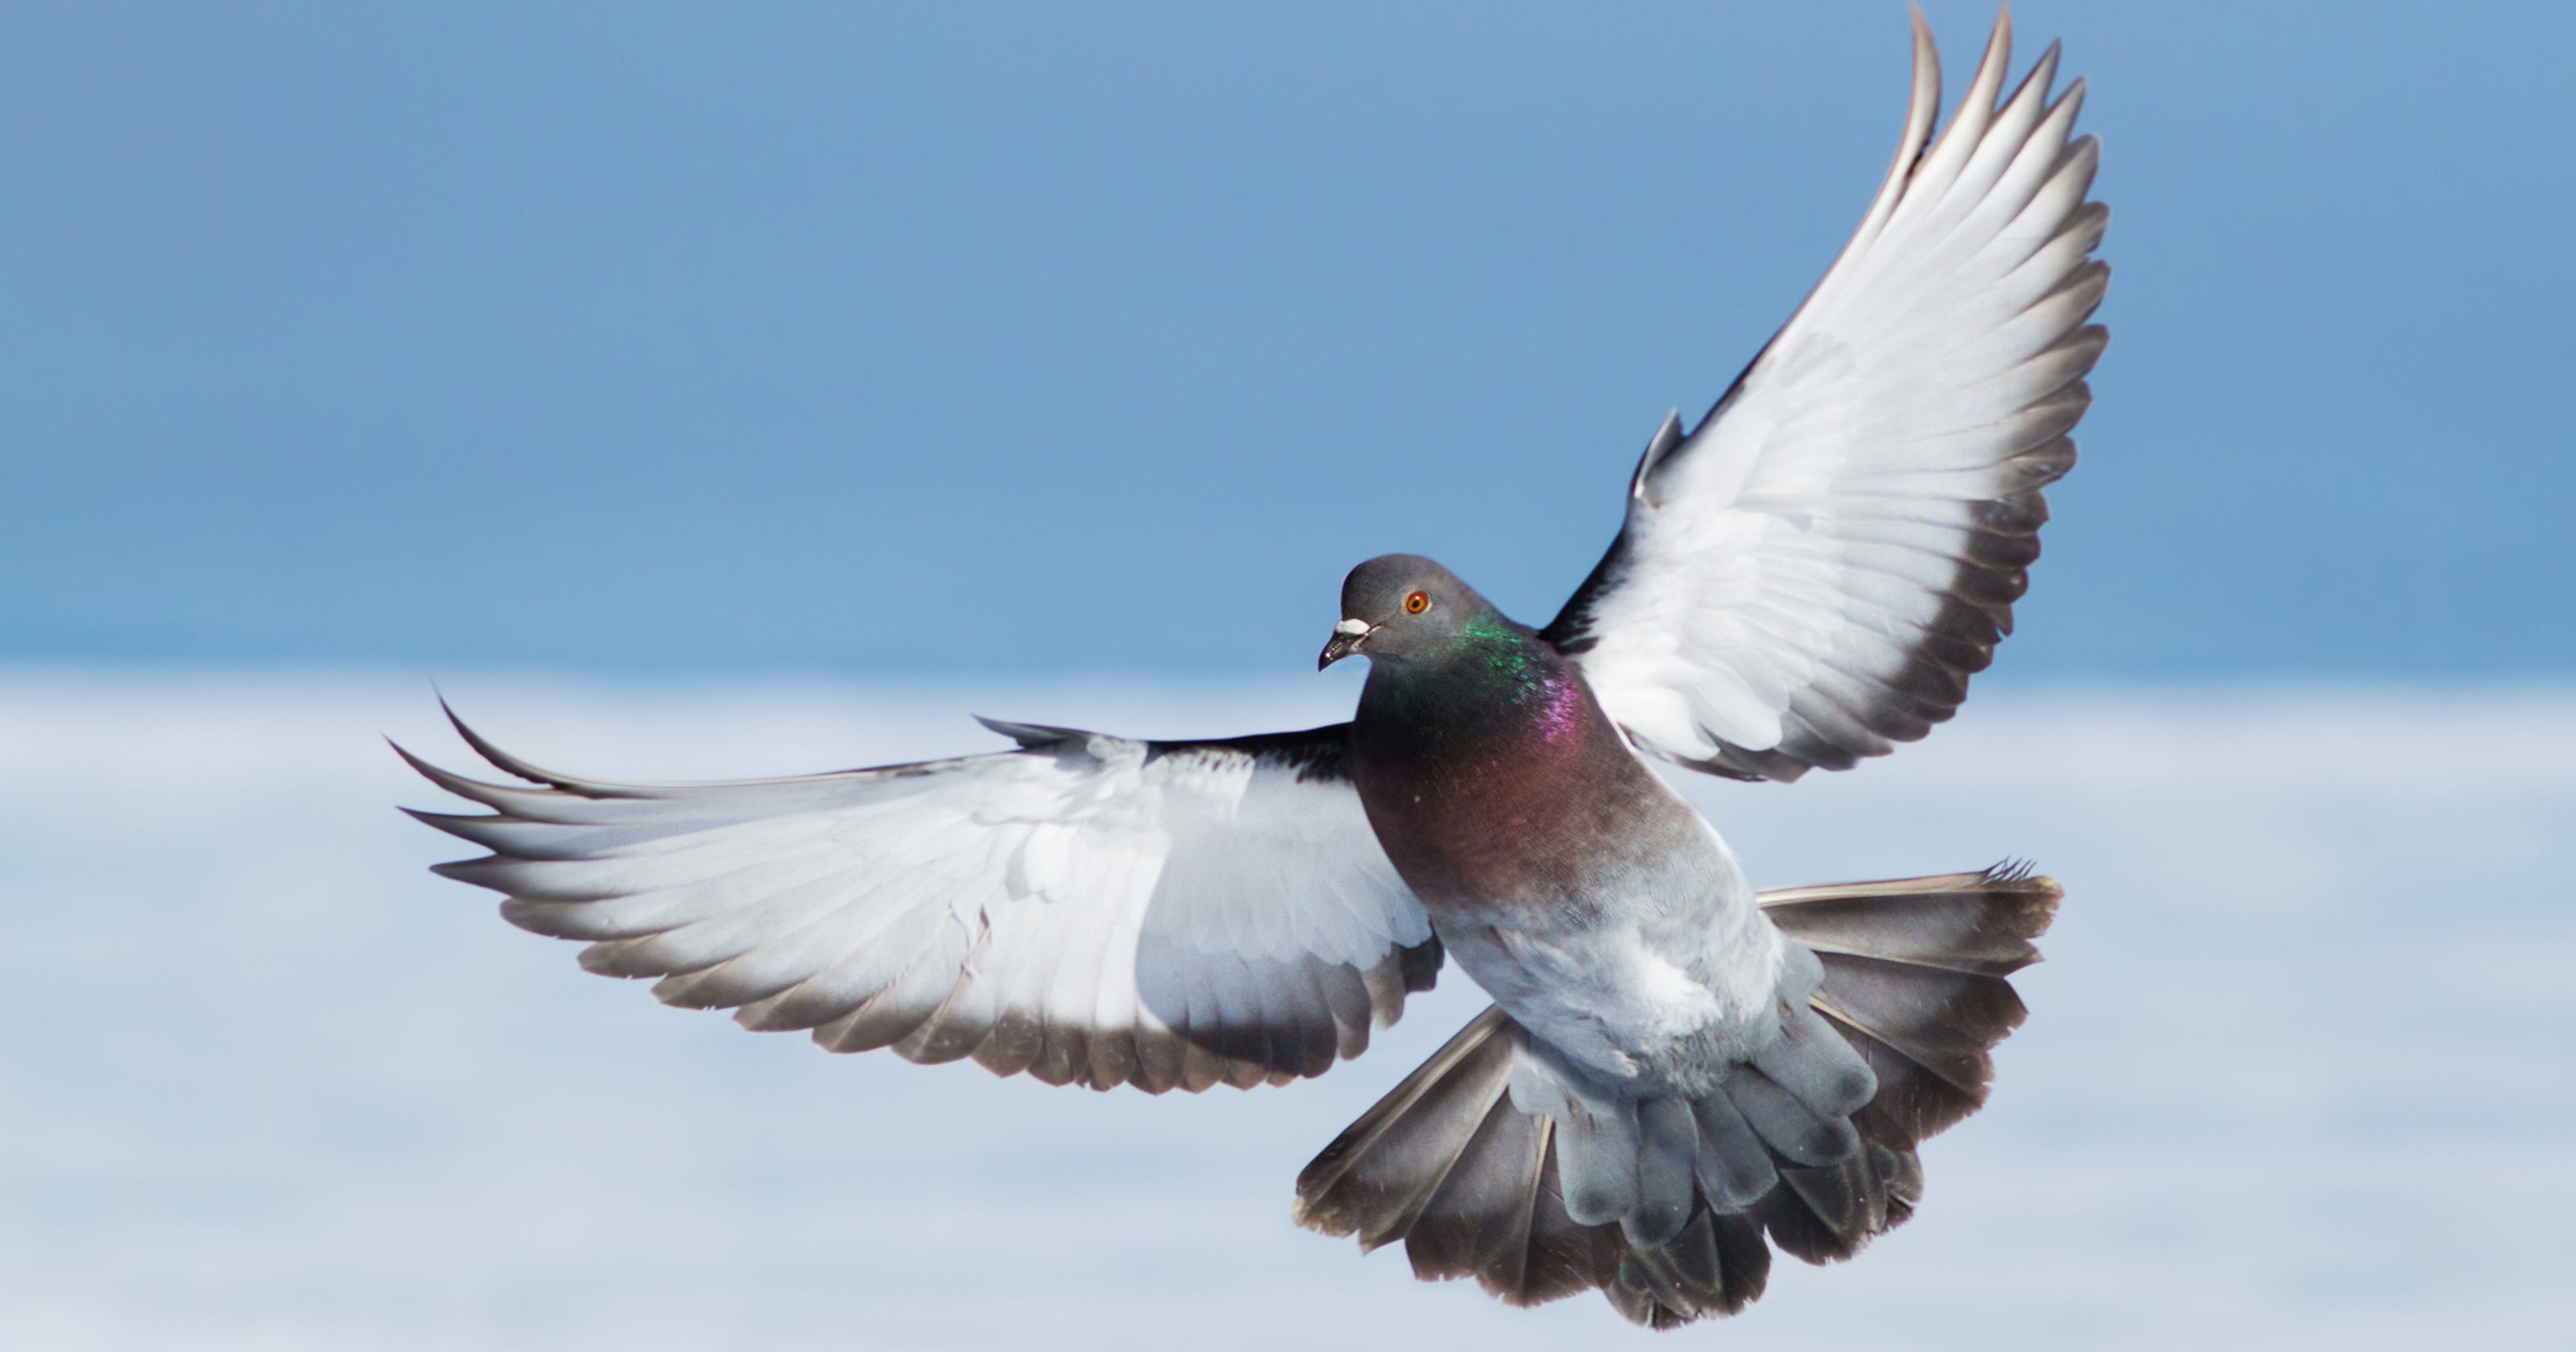 Outdoors Dove hunting season in NY? There's a chance